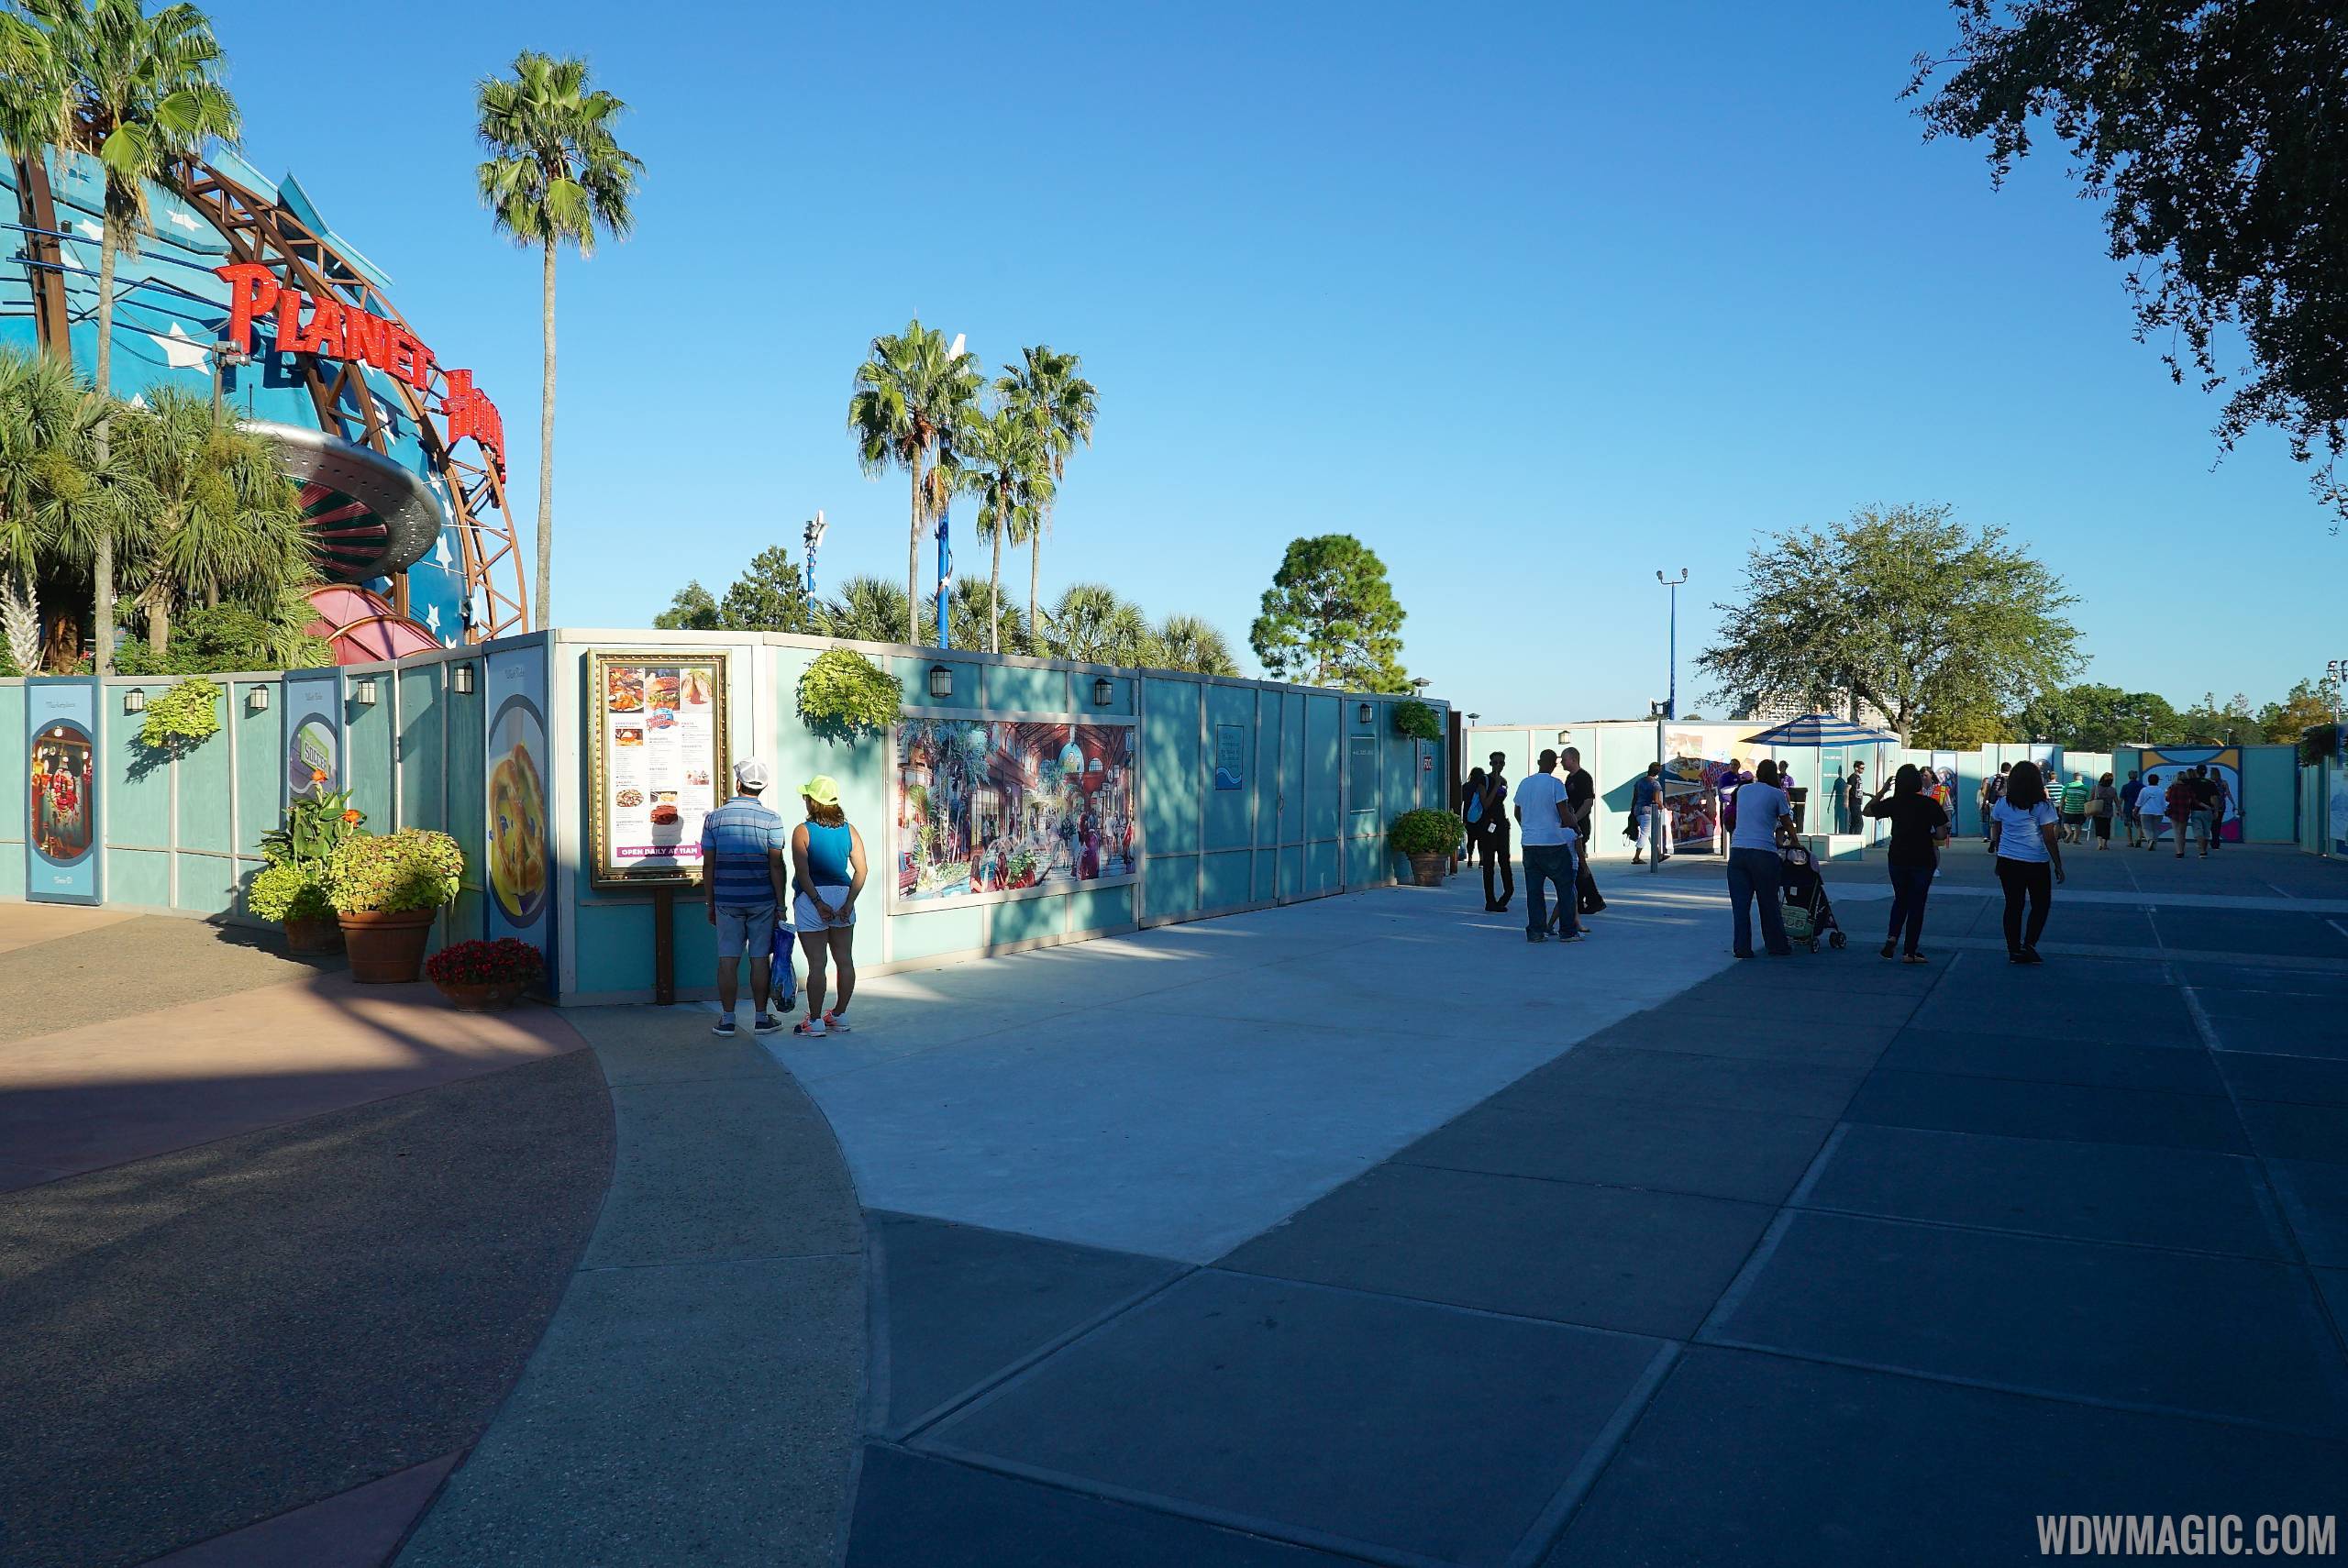 PHOTOS - Planet Hollywood gift shop demolished at Downtown Disney